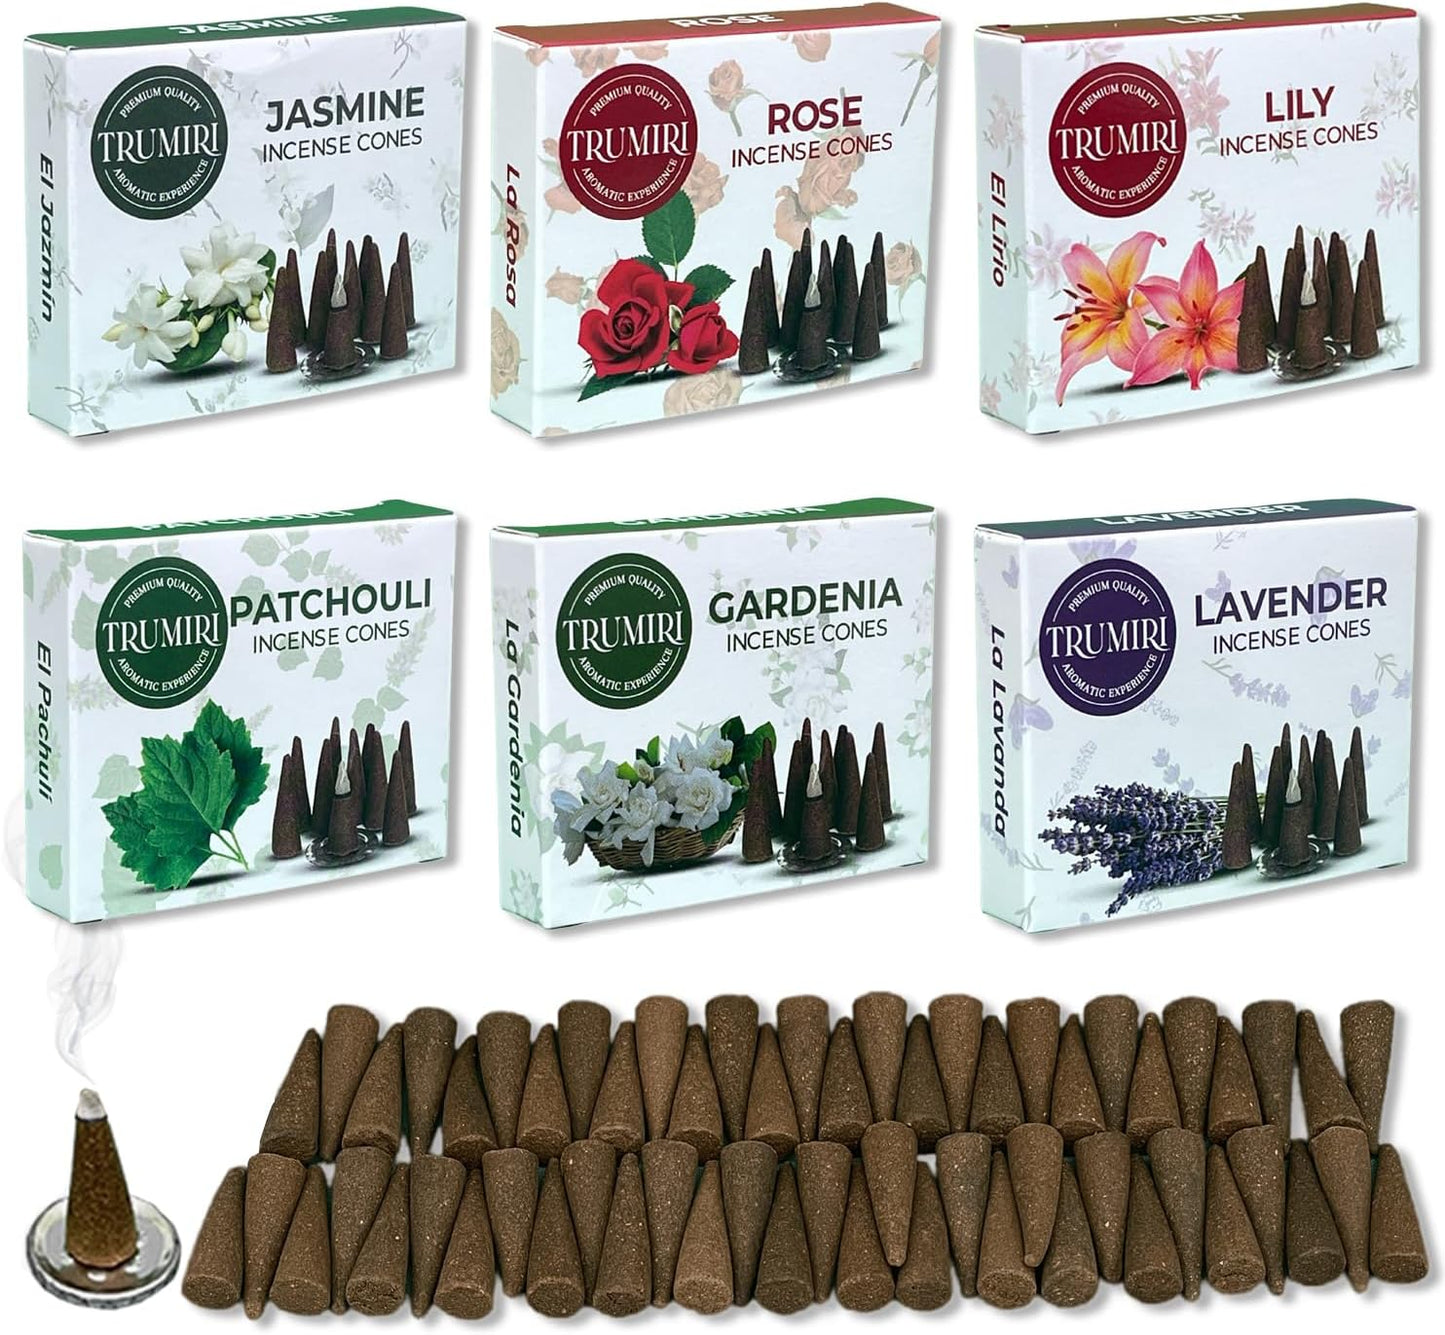 Trumiri Floral Scents Incense Cones Variety Pack of 6 Scents with 10 Cones per Scent - Total 60 Cones